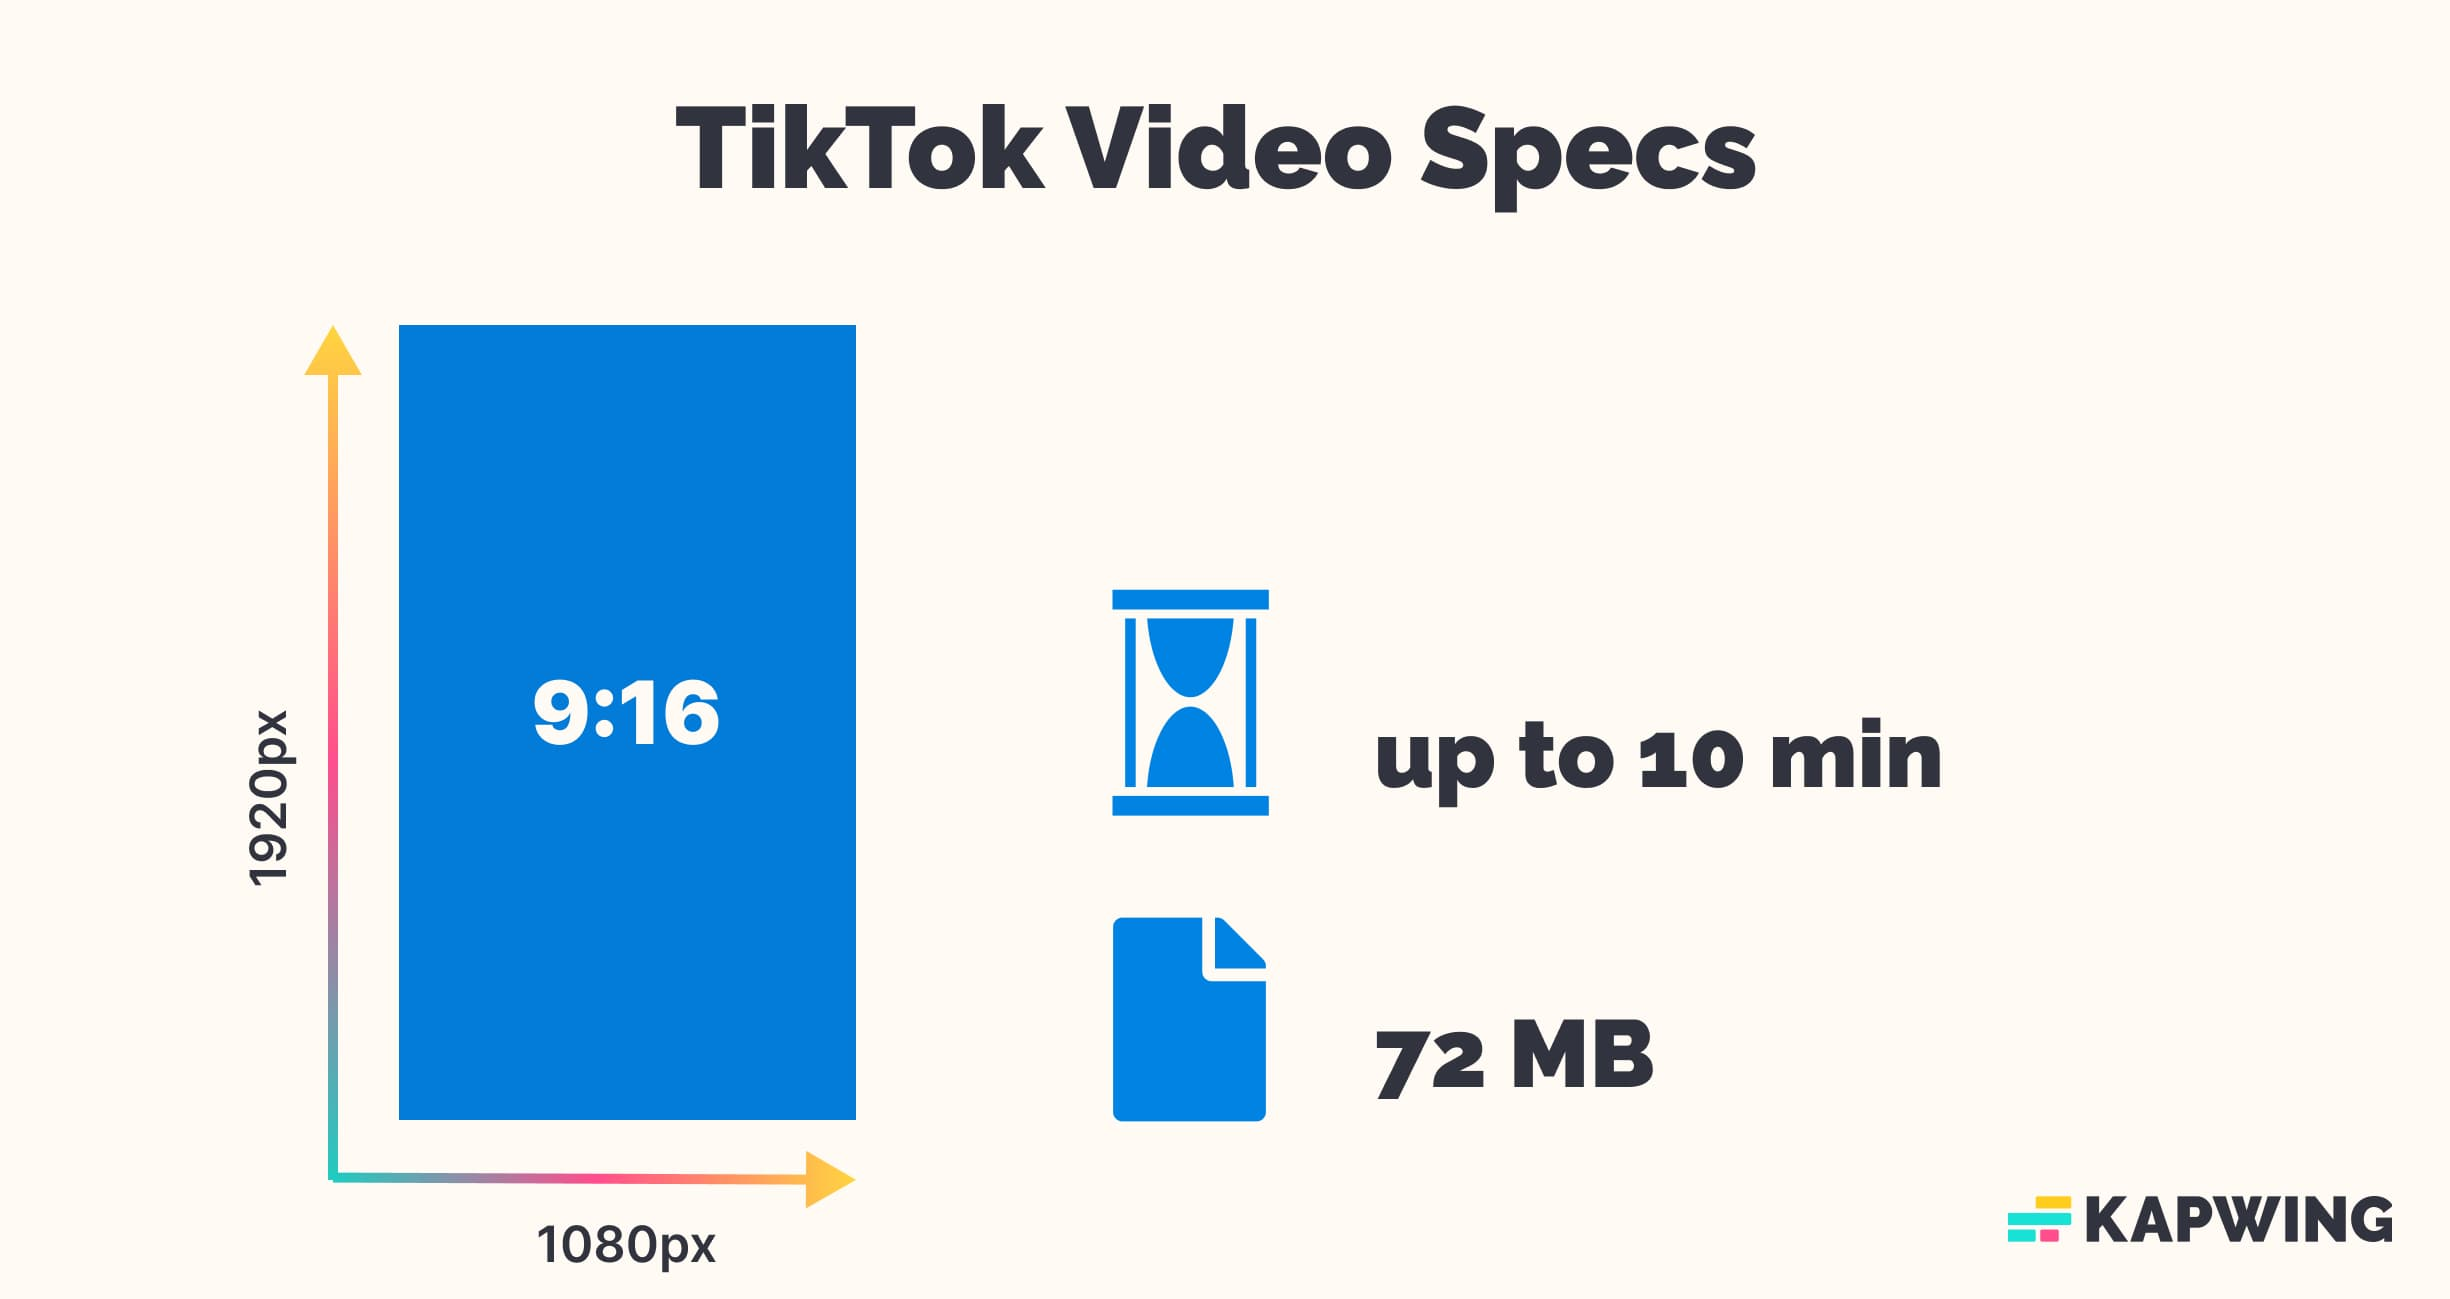 The Ultimate Social Media Video Sizes and Specs Guide